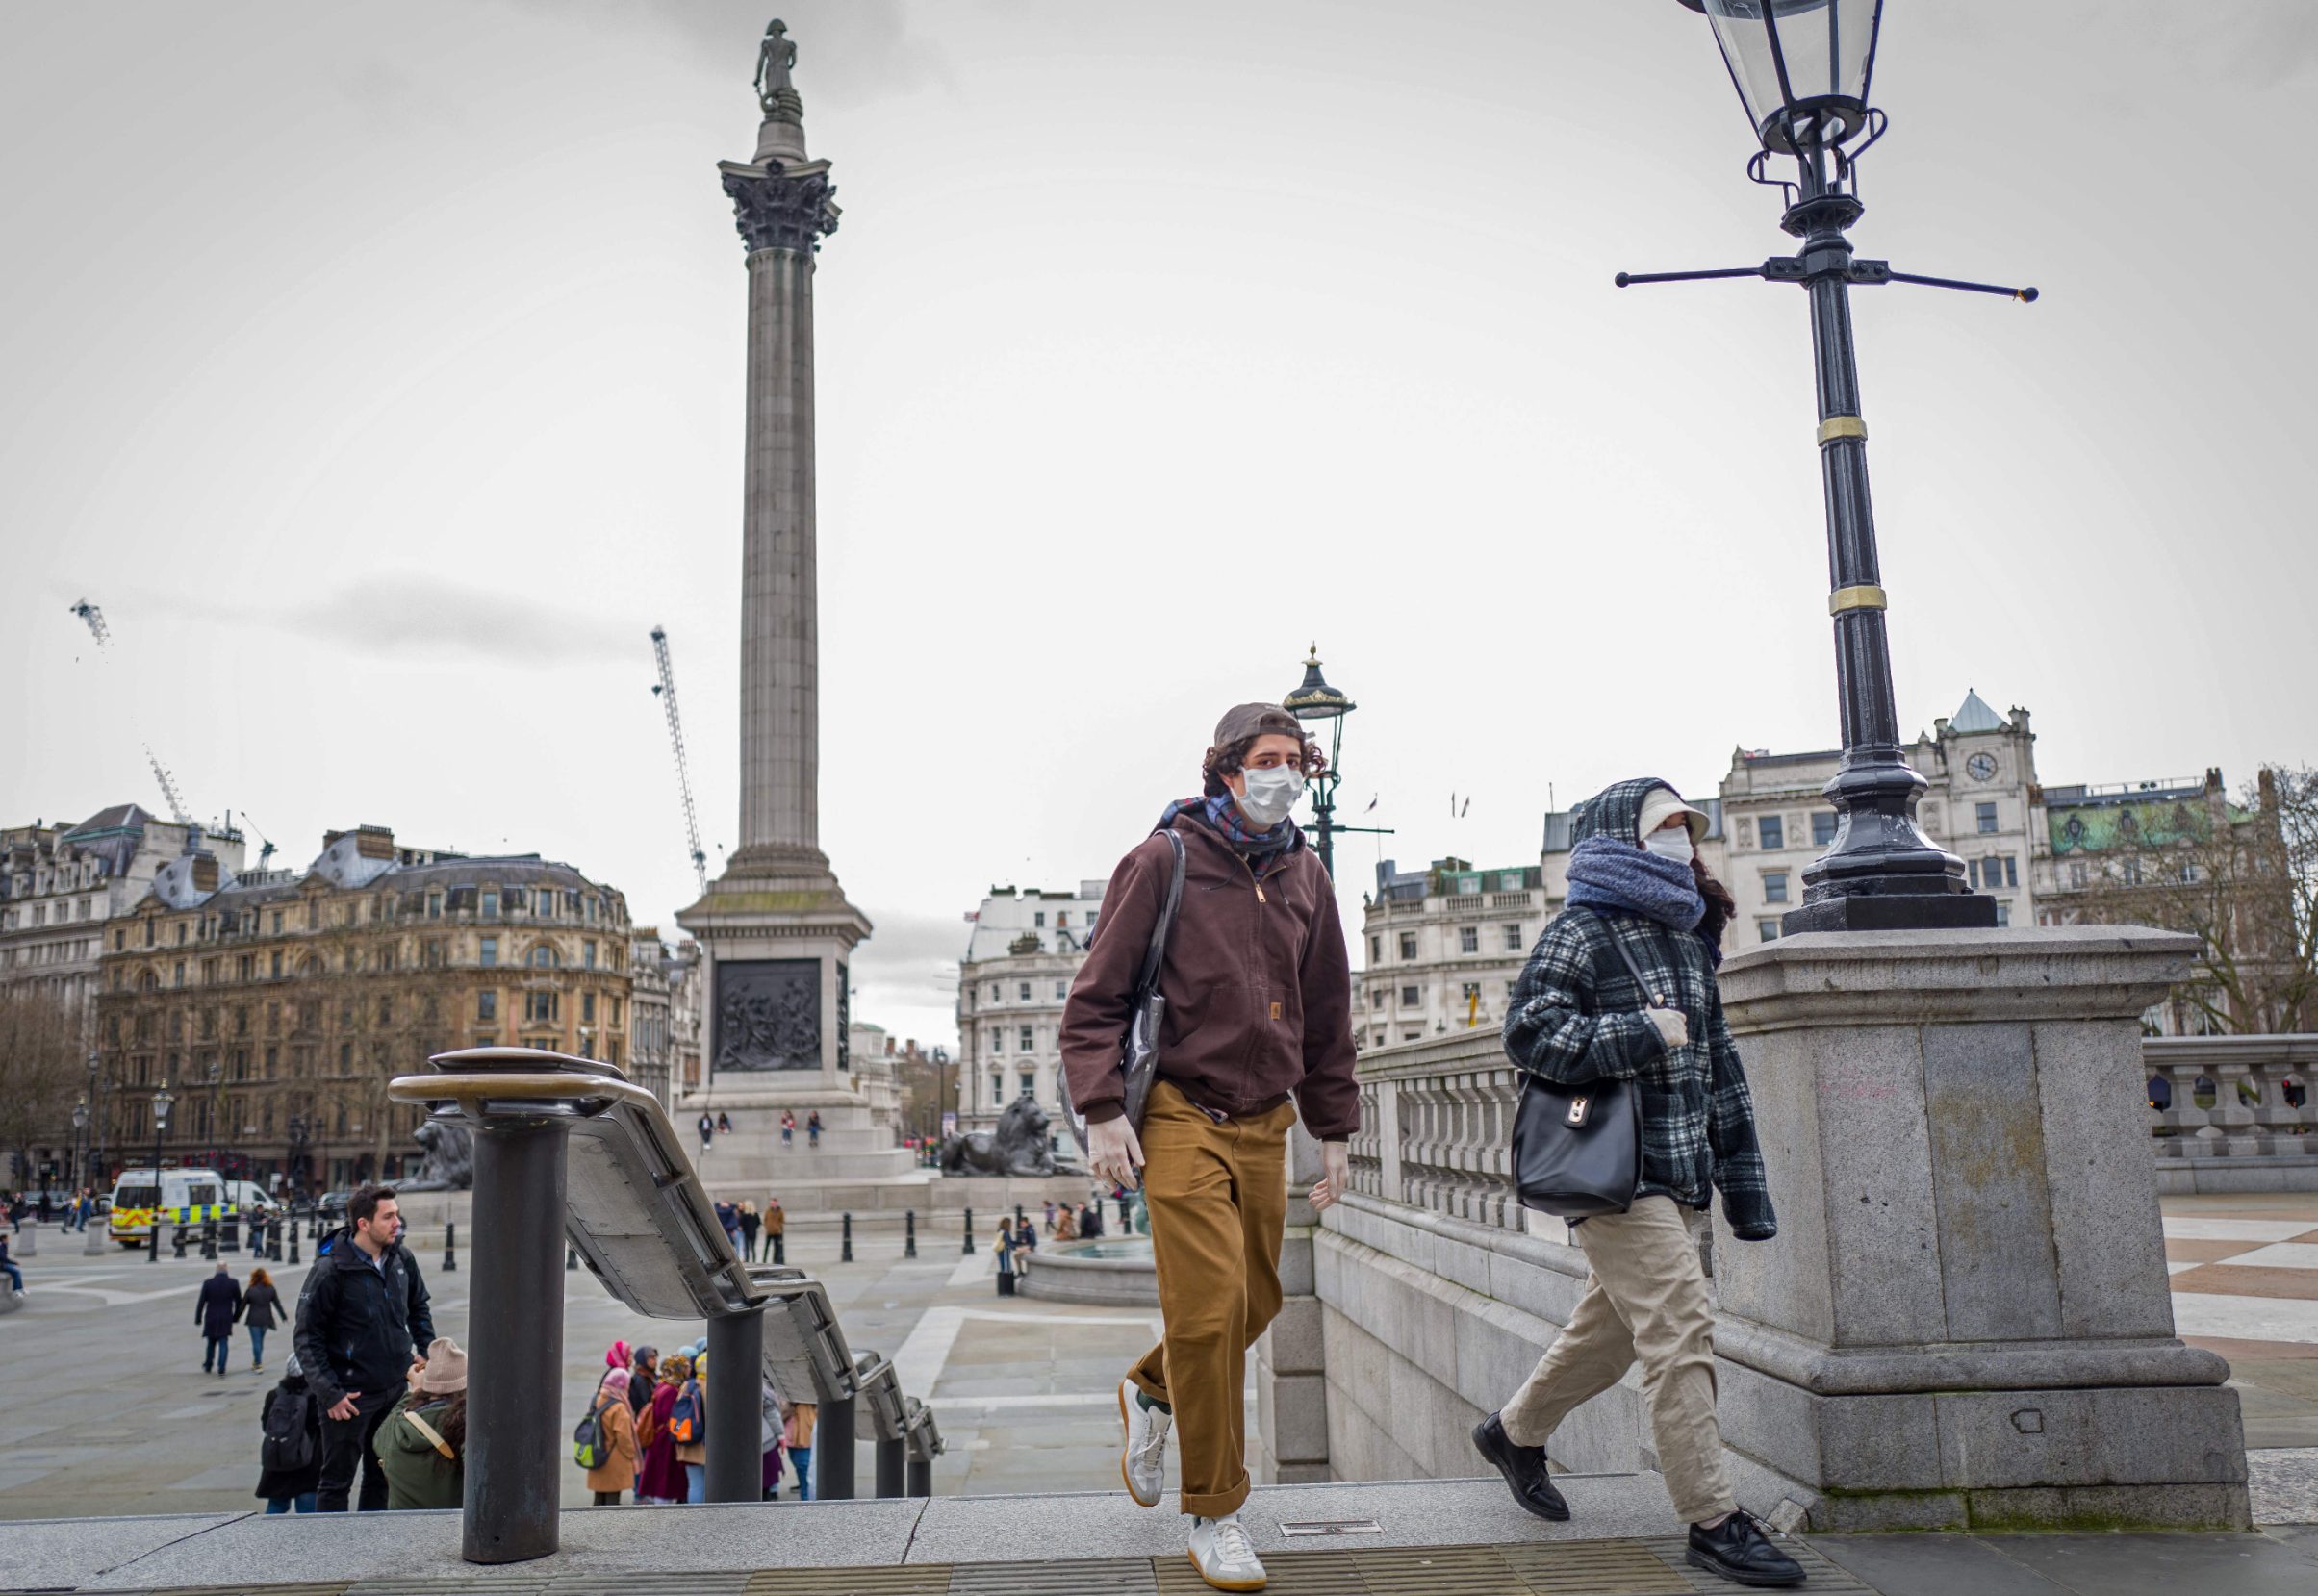 A man and a woman wearing protective face masks leave Trafalgar Square in central London on March 15, 2020. - britain on Sunday said its criticised plan to deal with coronavirus was designed to 